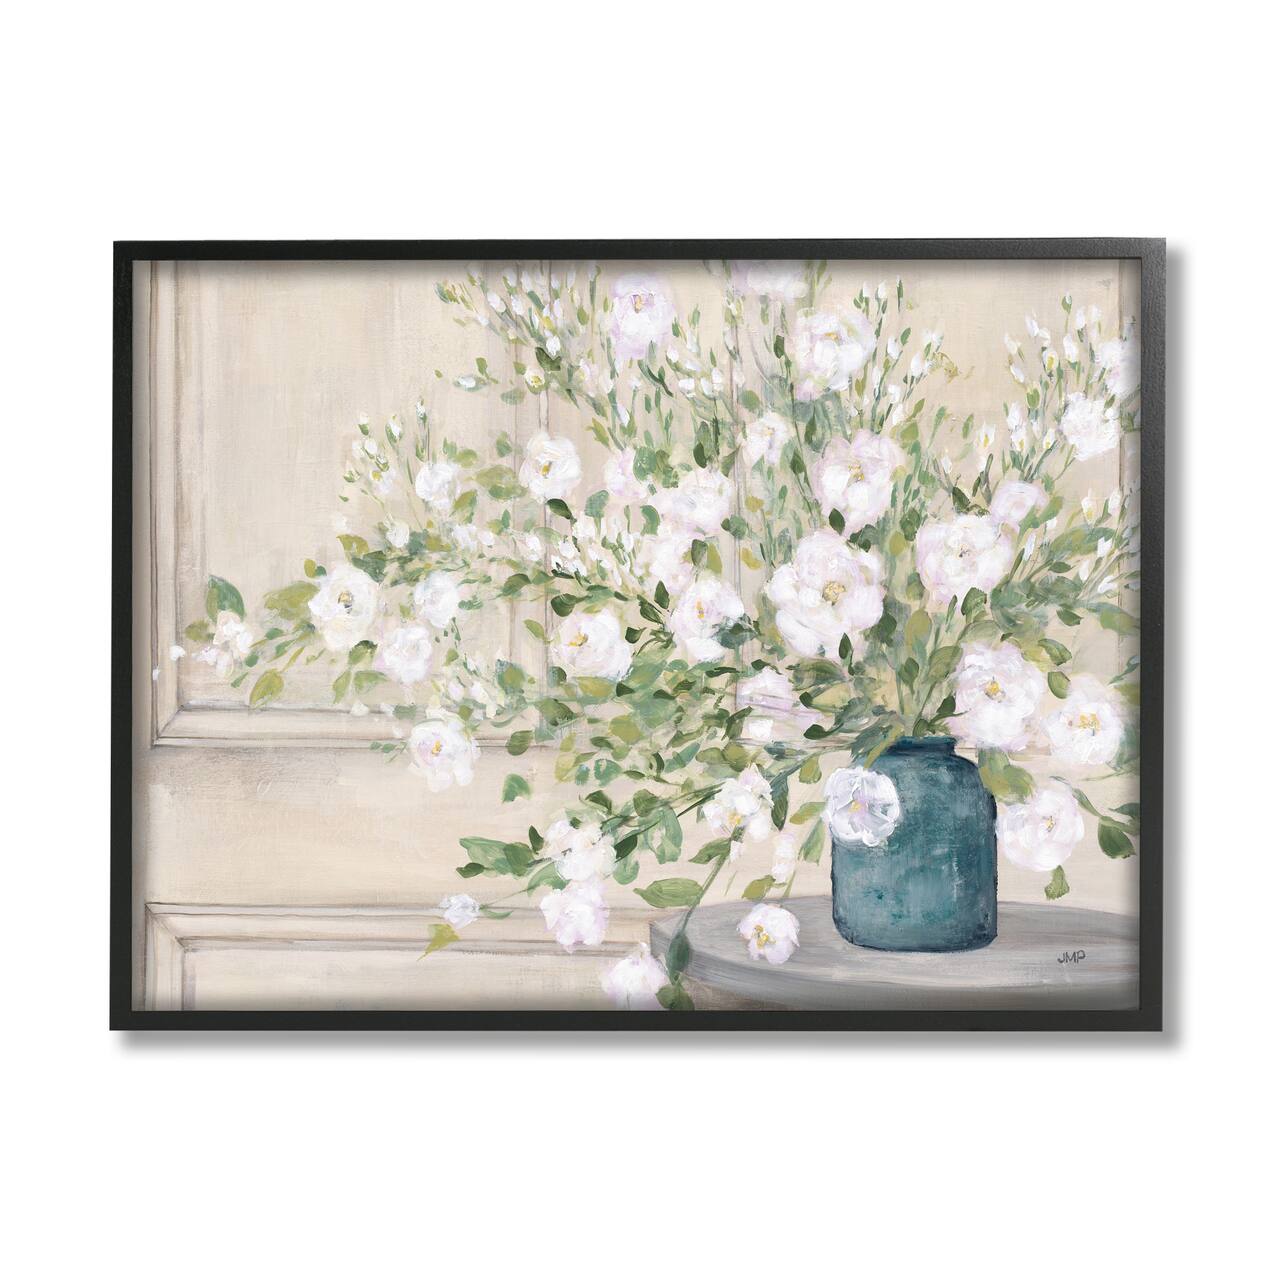 Stupell Industries Geranium Tabletop Country Still Life Painting Blooming Flowers Framed Wall Art